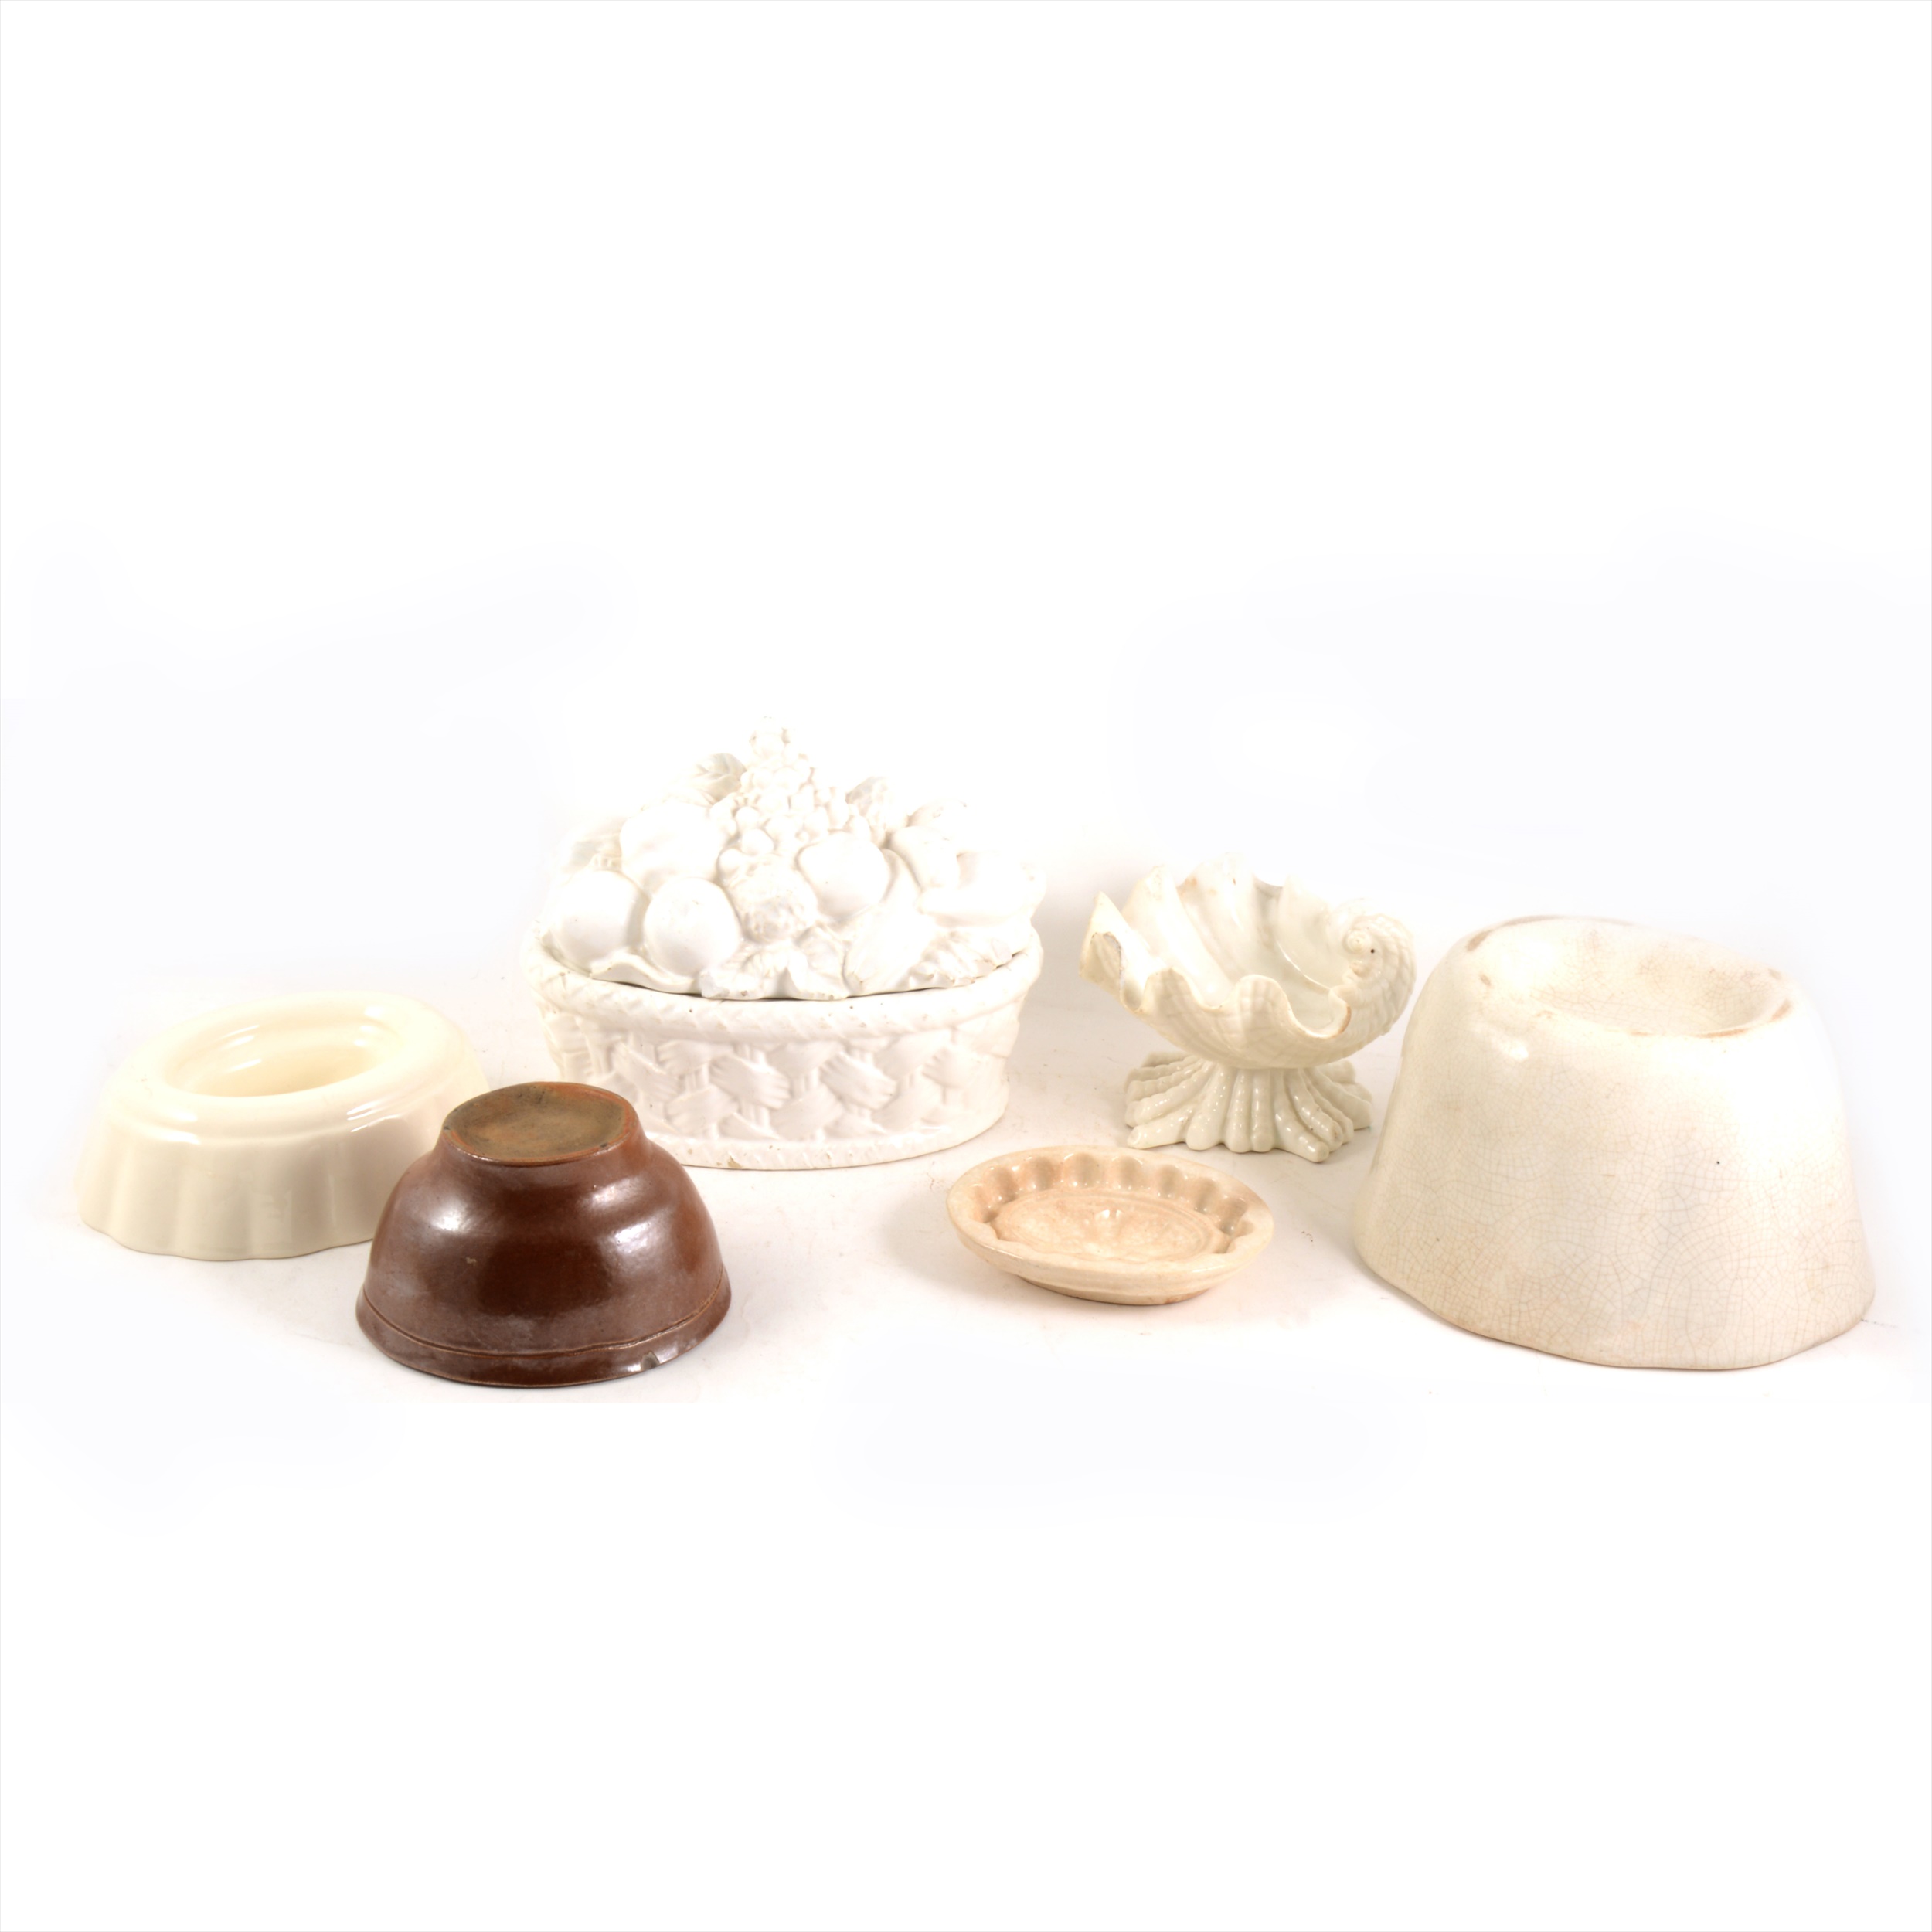 Several ceramic jelly/ blancmange moulds and others.